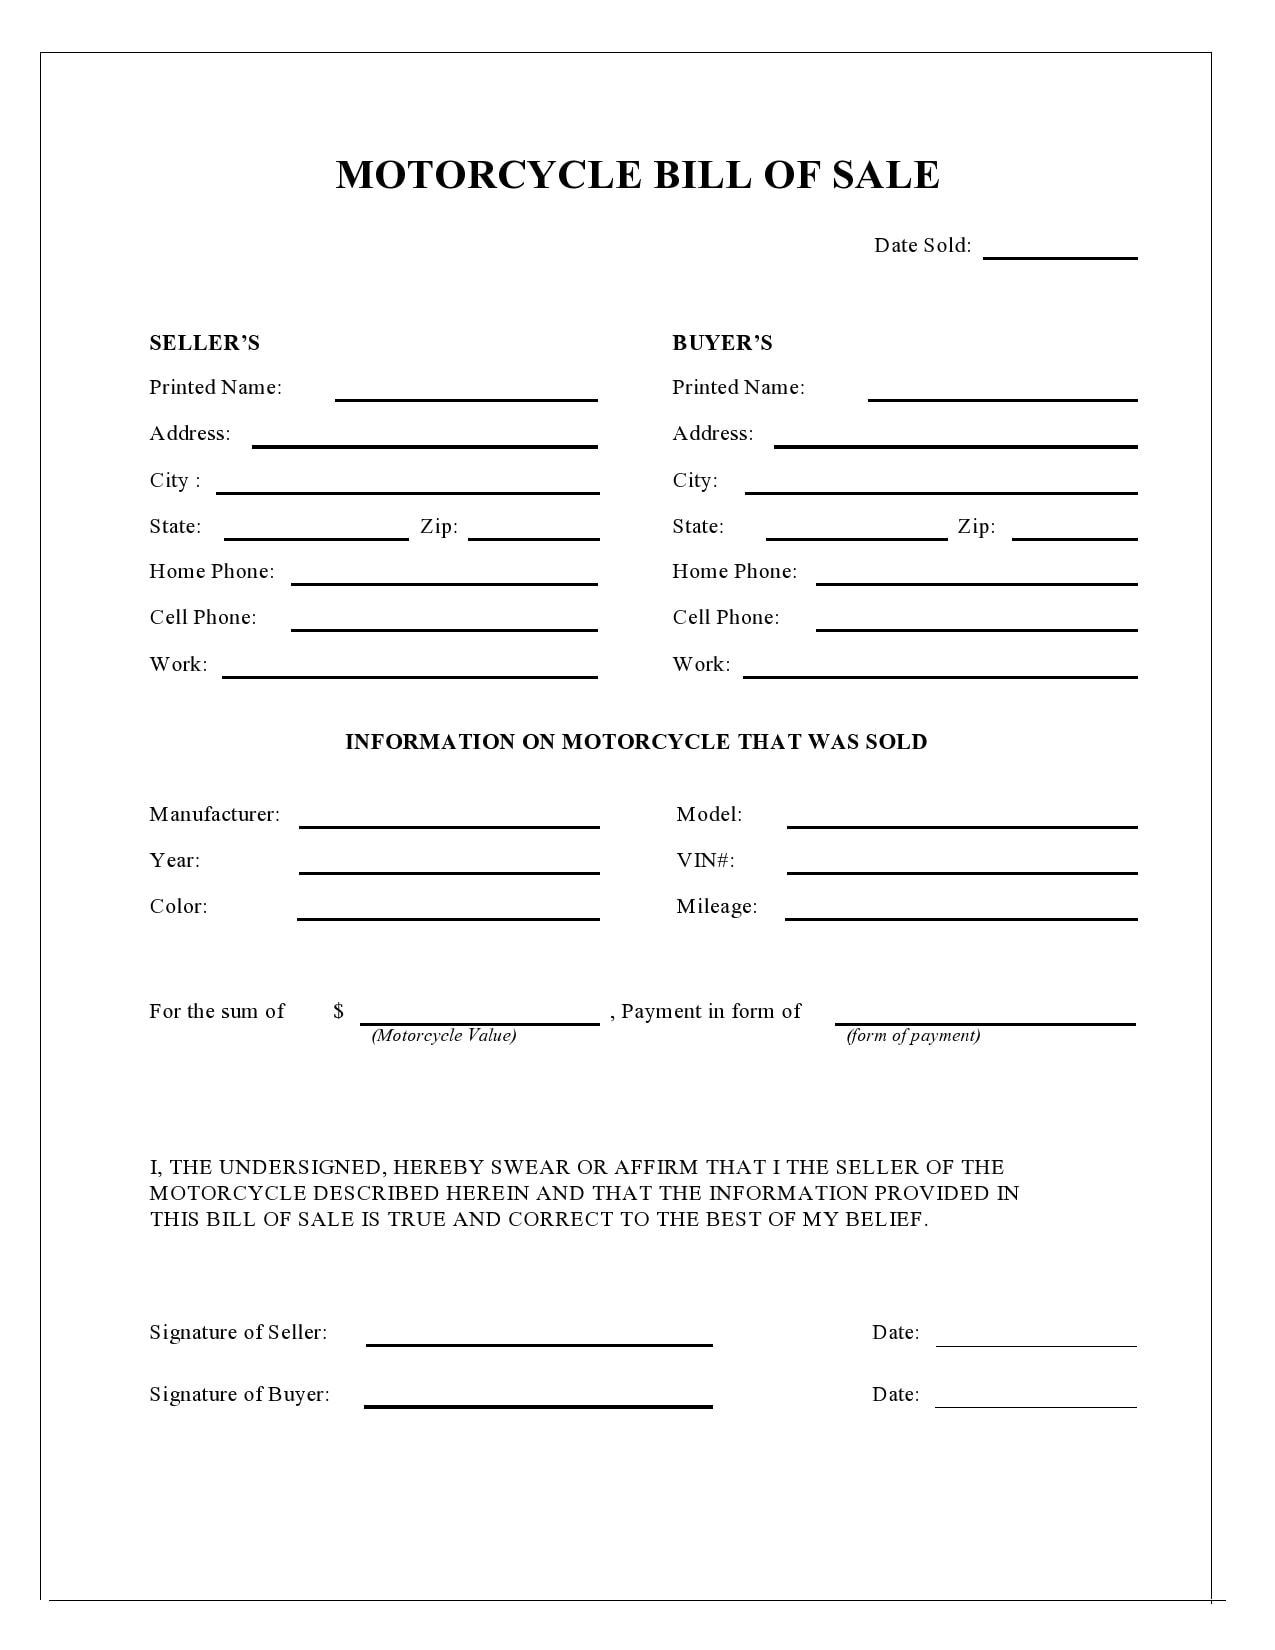 30 Printable Motorcycle Bill Of Sale Forms [Free] - TemplateArchive